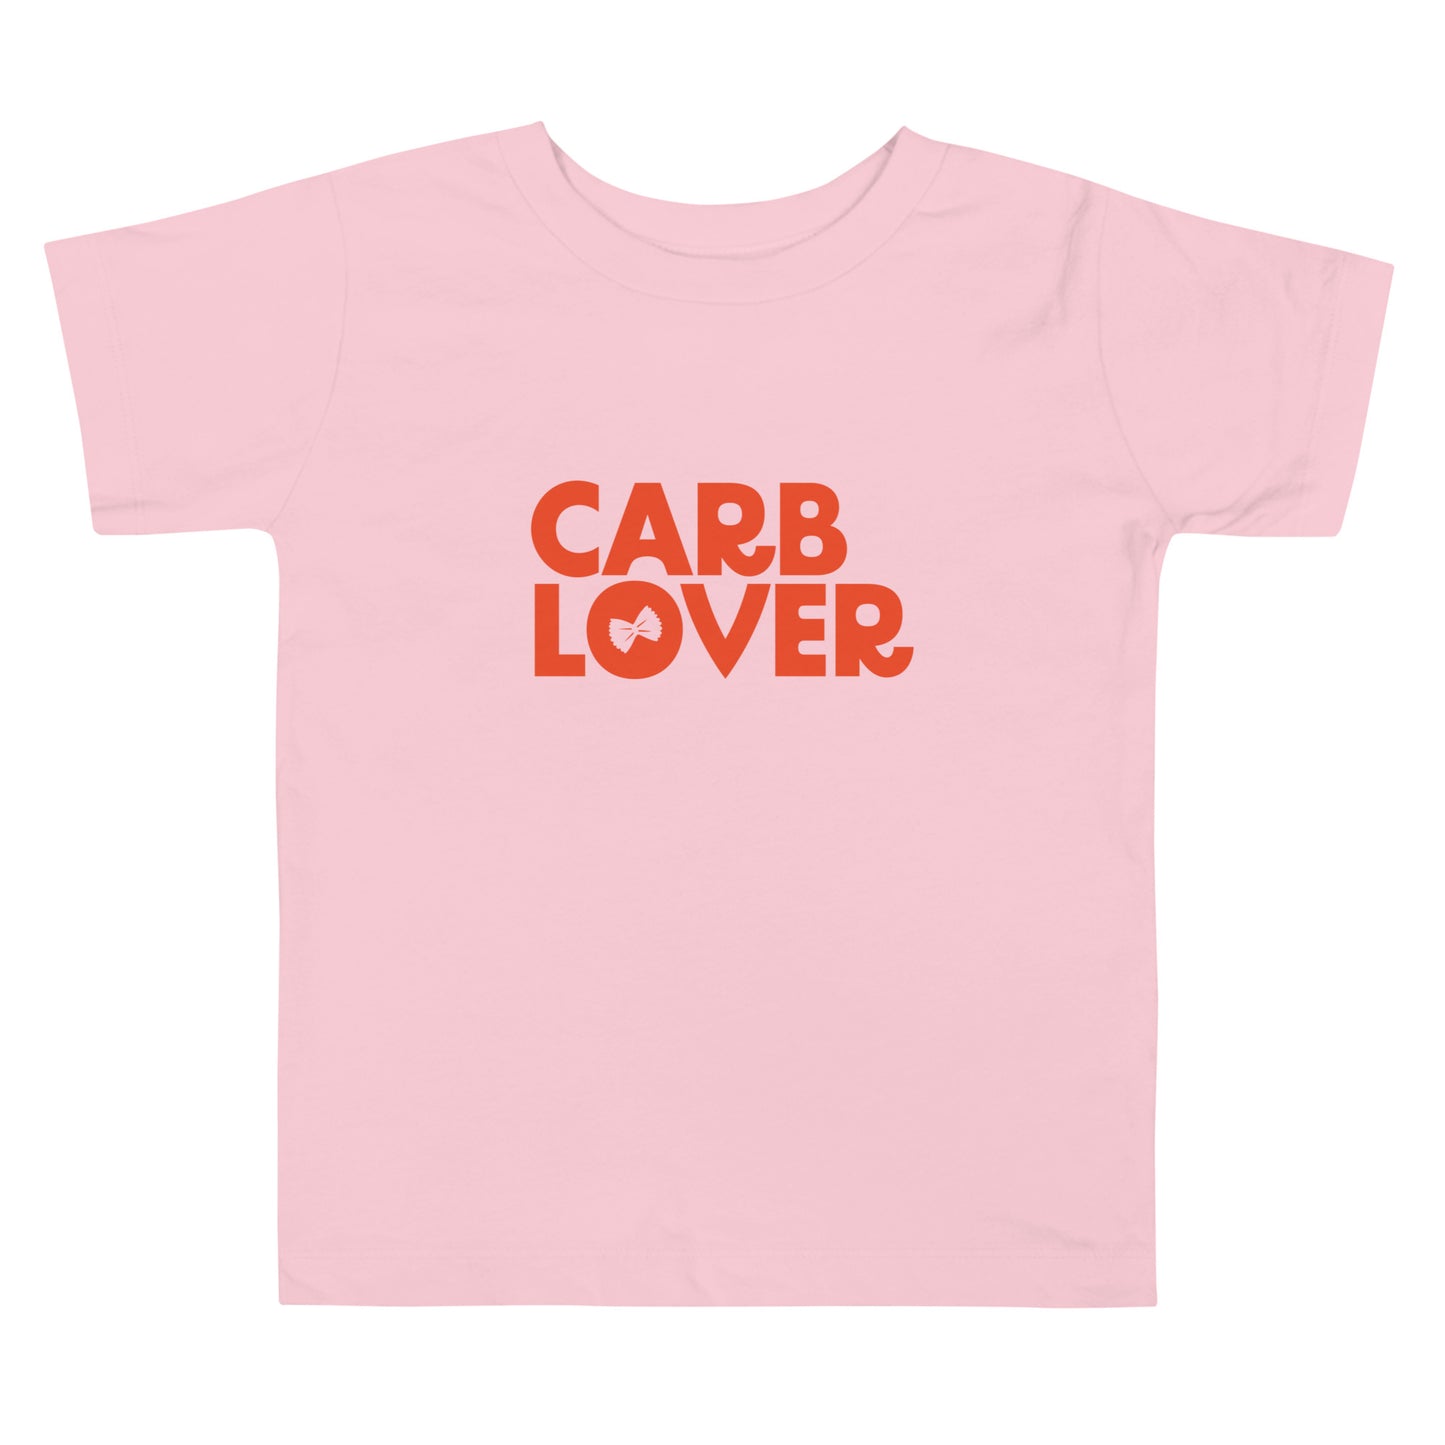 Carb Lover - Toddler Tee